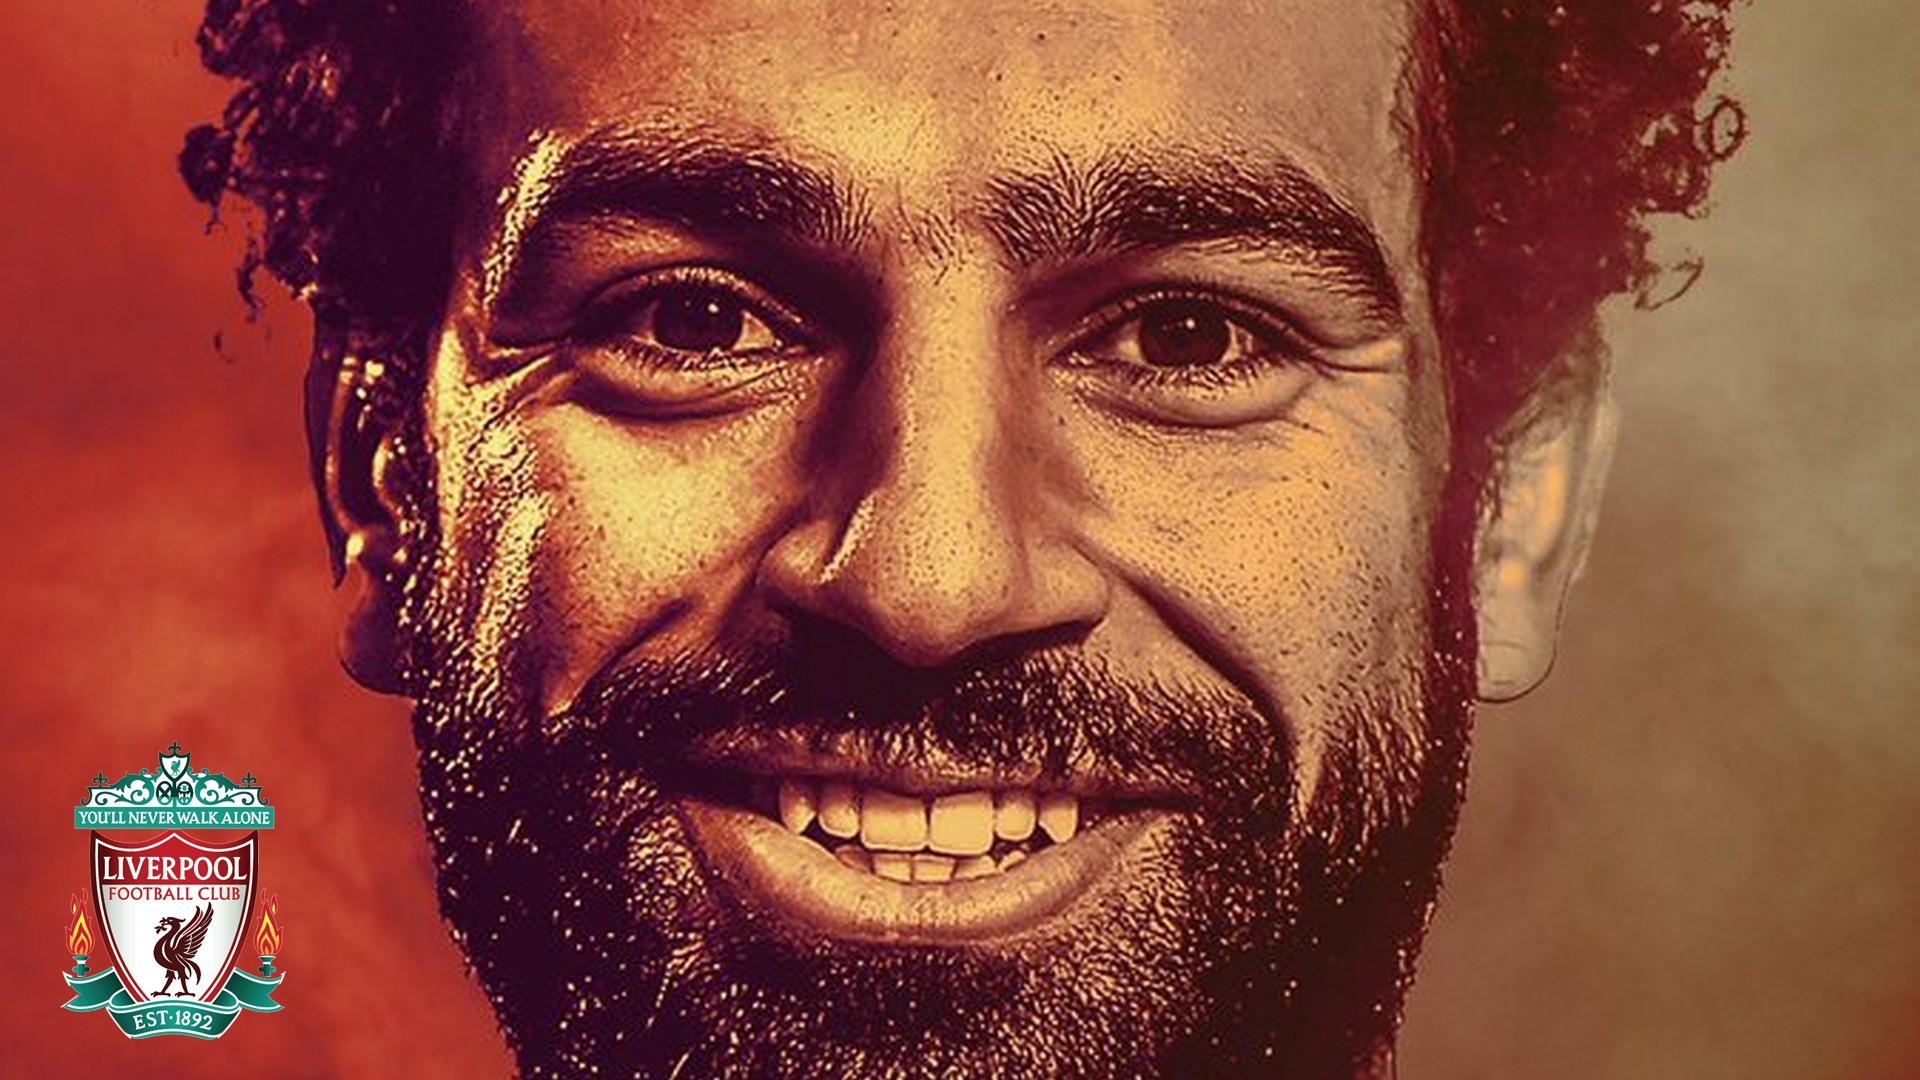 Mohamed Salah Liverpool Desktop Backgrounds HD with resolution 1920X1080 pixel. You can use this wallpaper as background for your desktop Computer Screensavers, Android or iPhone smartphones